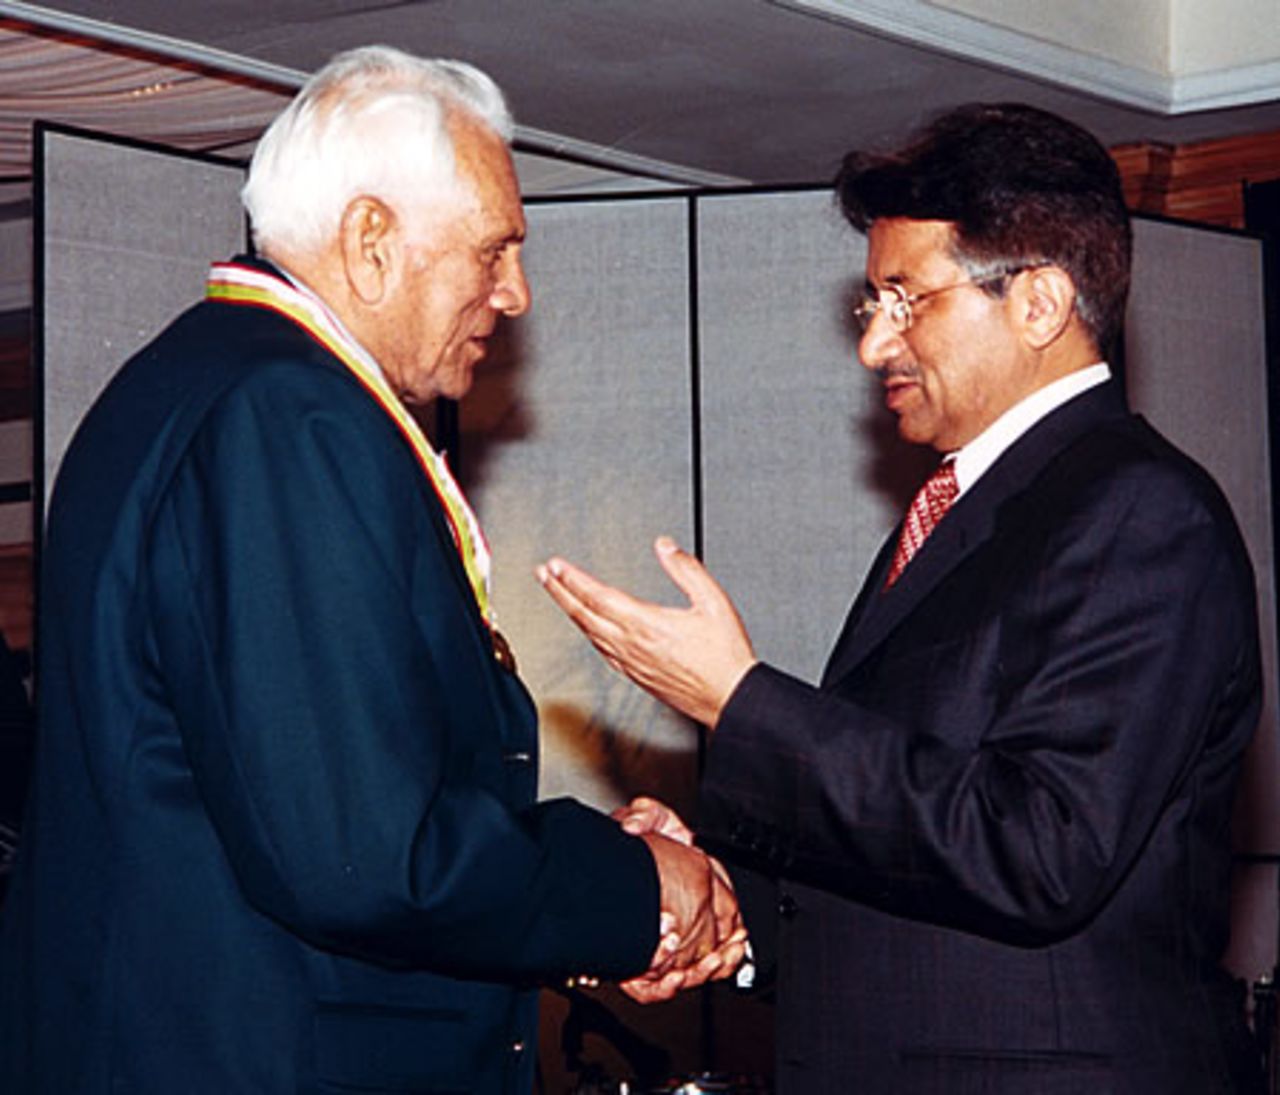 Khan Mohammad receiving his medal from Pakistan president during the Golden Jubilee of Test Cricket Gala, Islamabad, September 16, 2003.